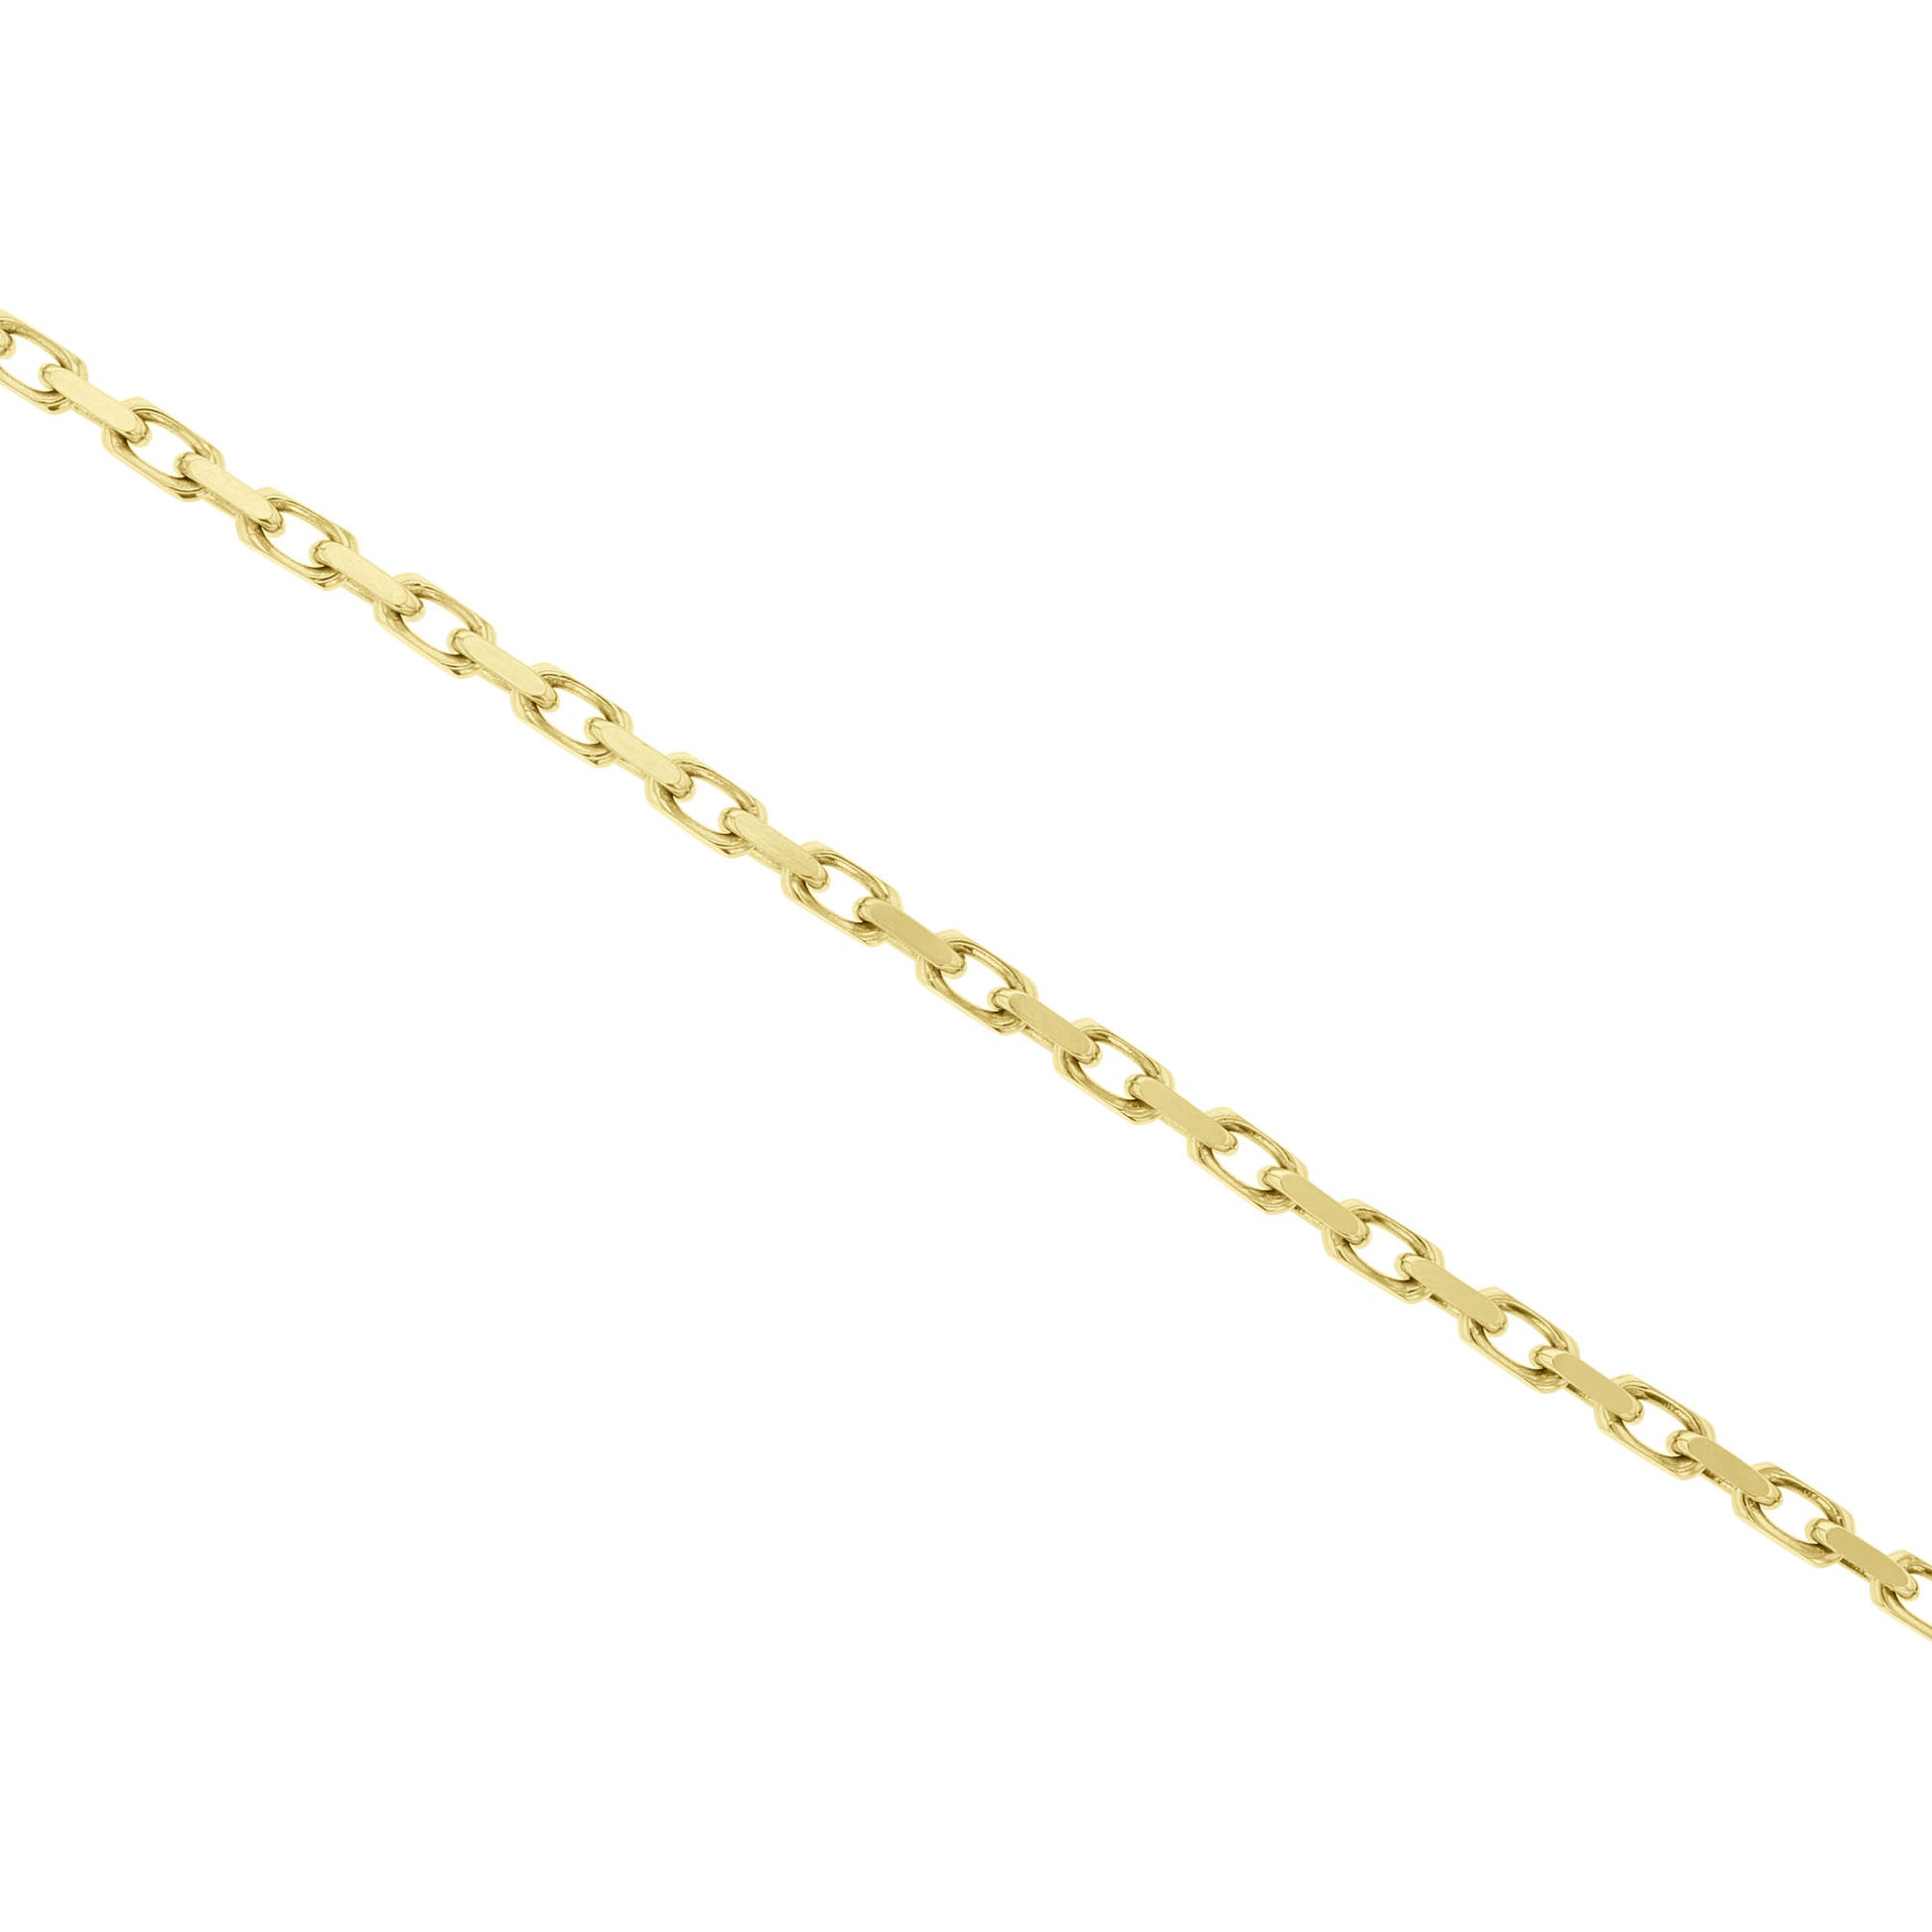 Frenchie Gold Cable Bracelet